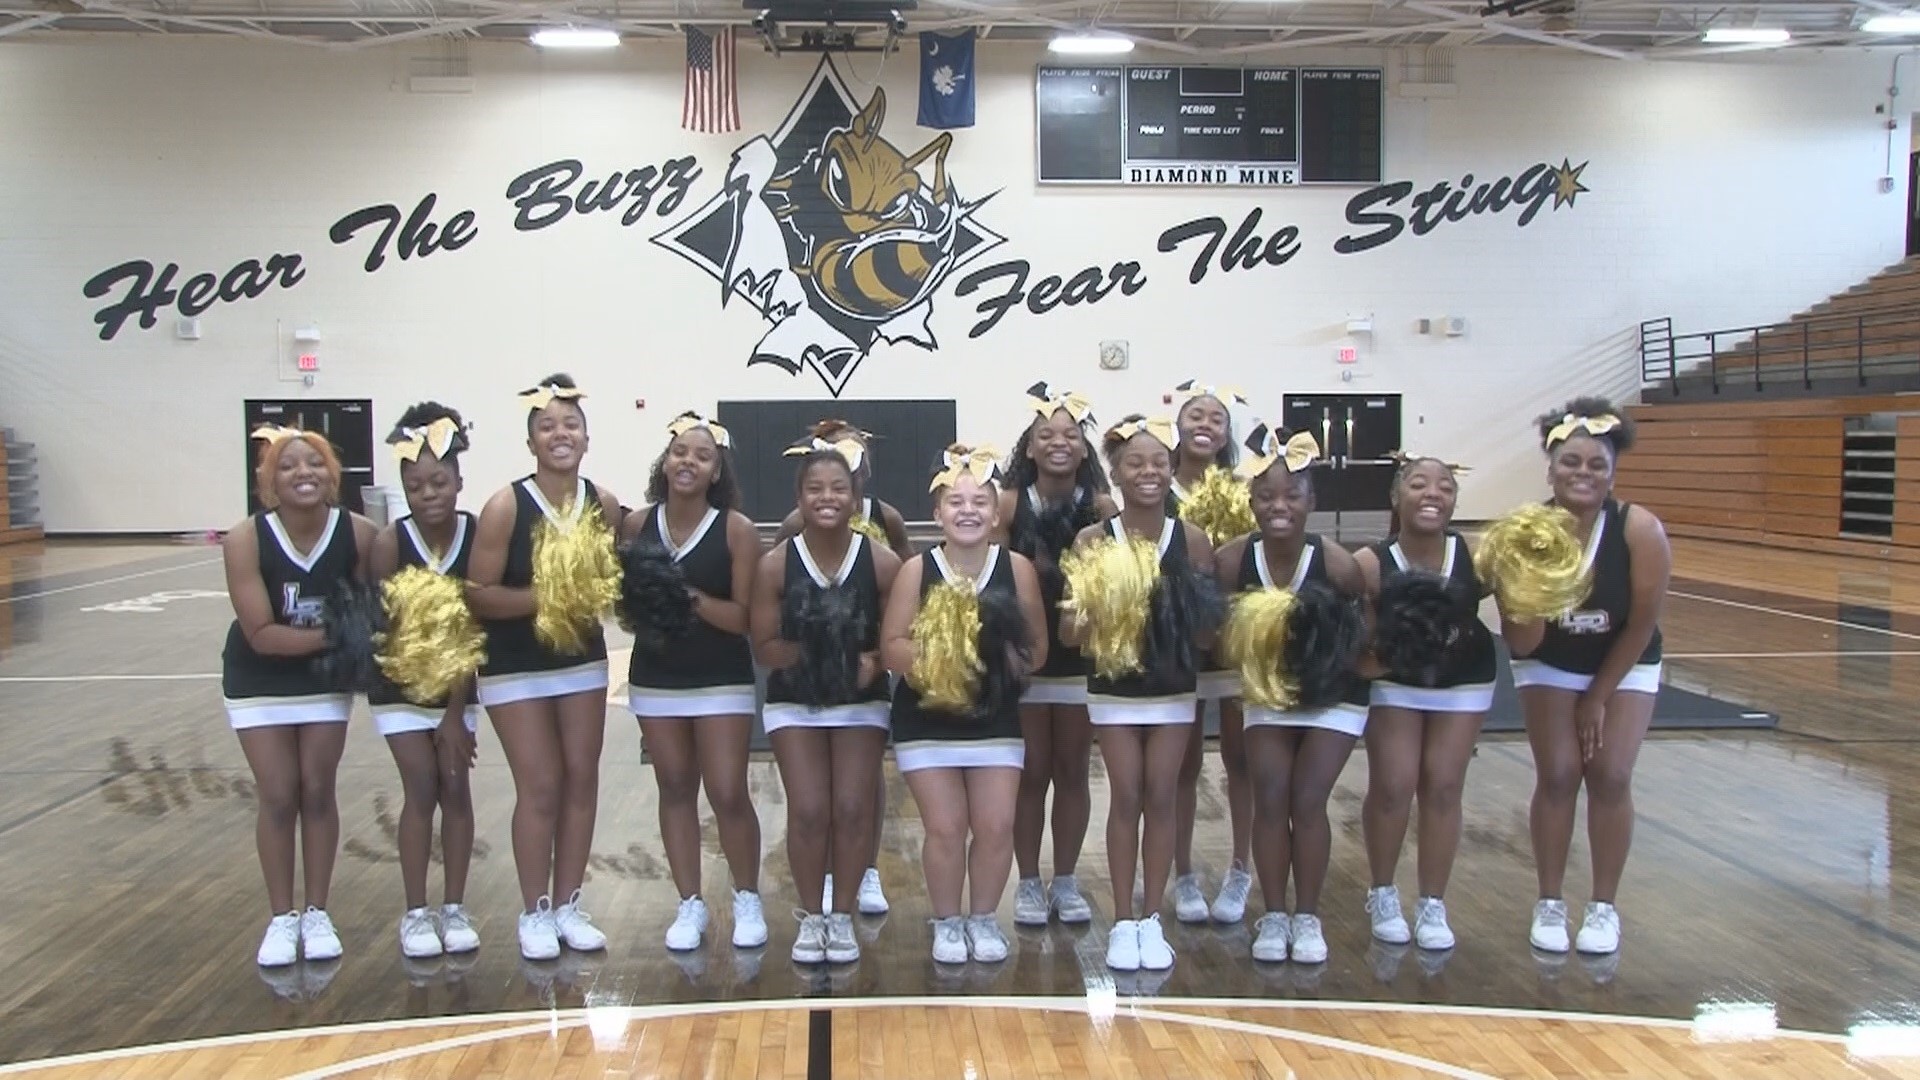 The Lower Richland High School cheerleaders help kick start the new school year for Richland One.